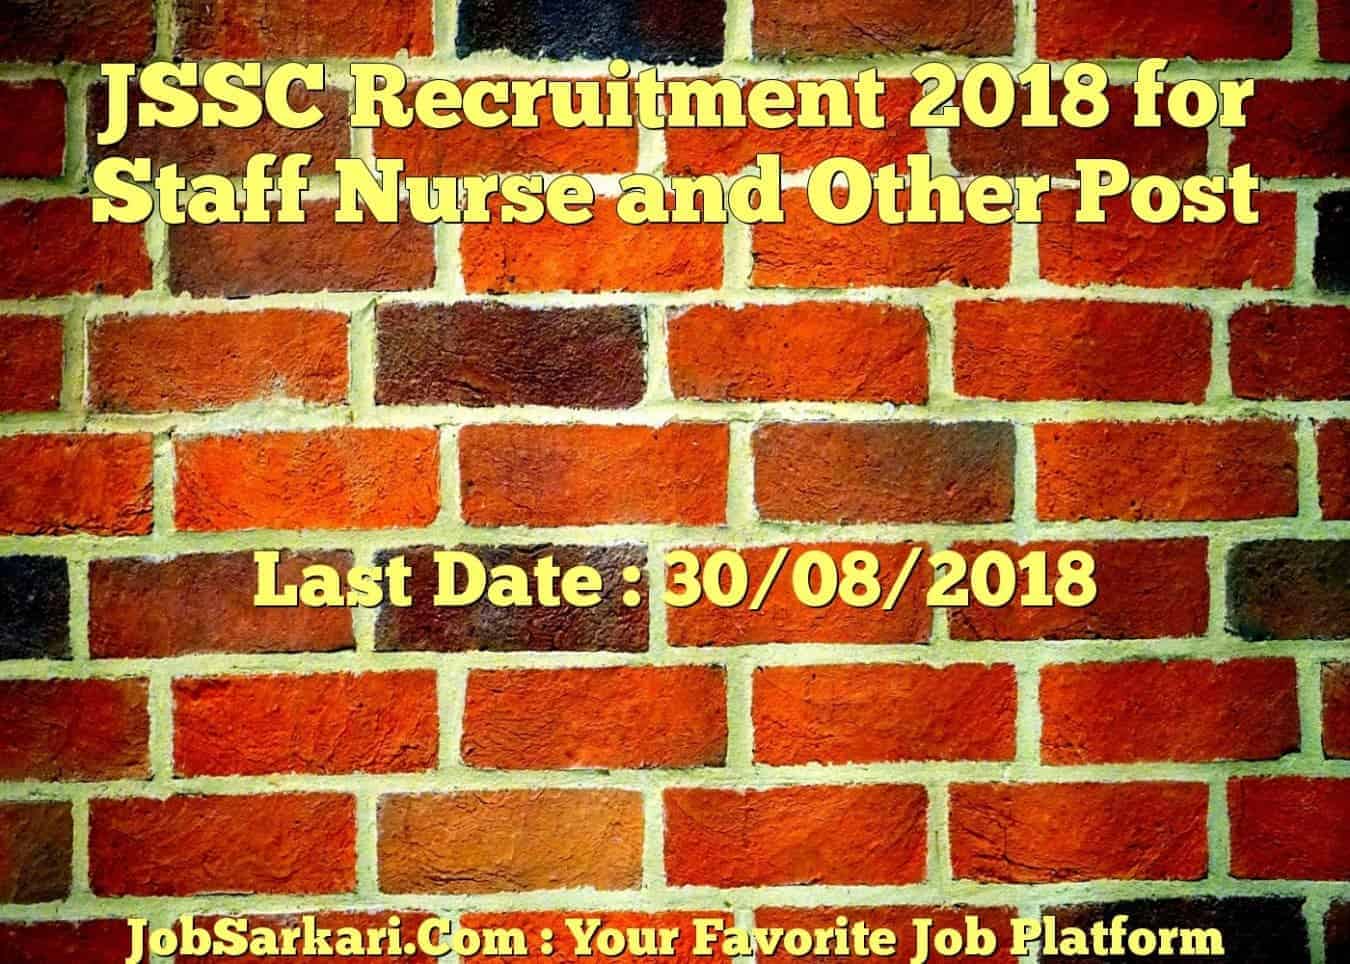 JSSC Recruitment 2018 for Staff Nurse and Other Post